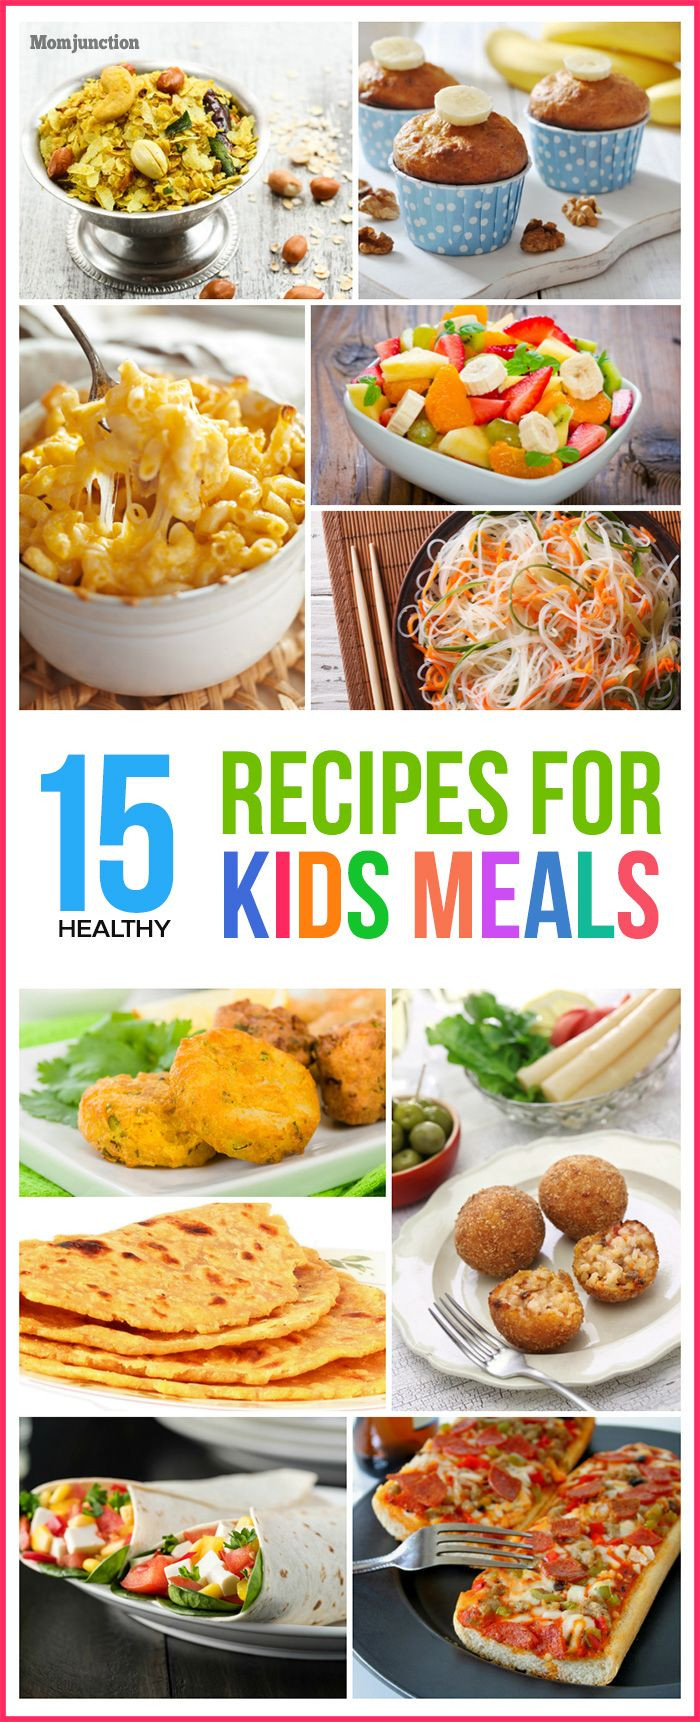 Easy Healthy Kid Friendly Dinners
 Top 15 Healthy Recipes For Kids Meals